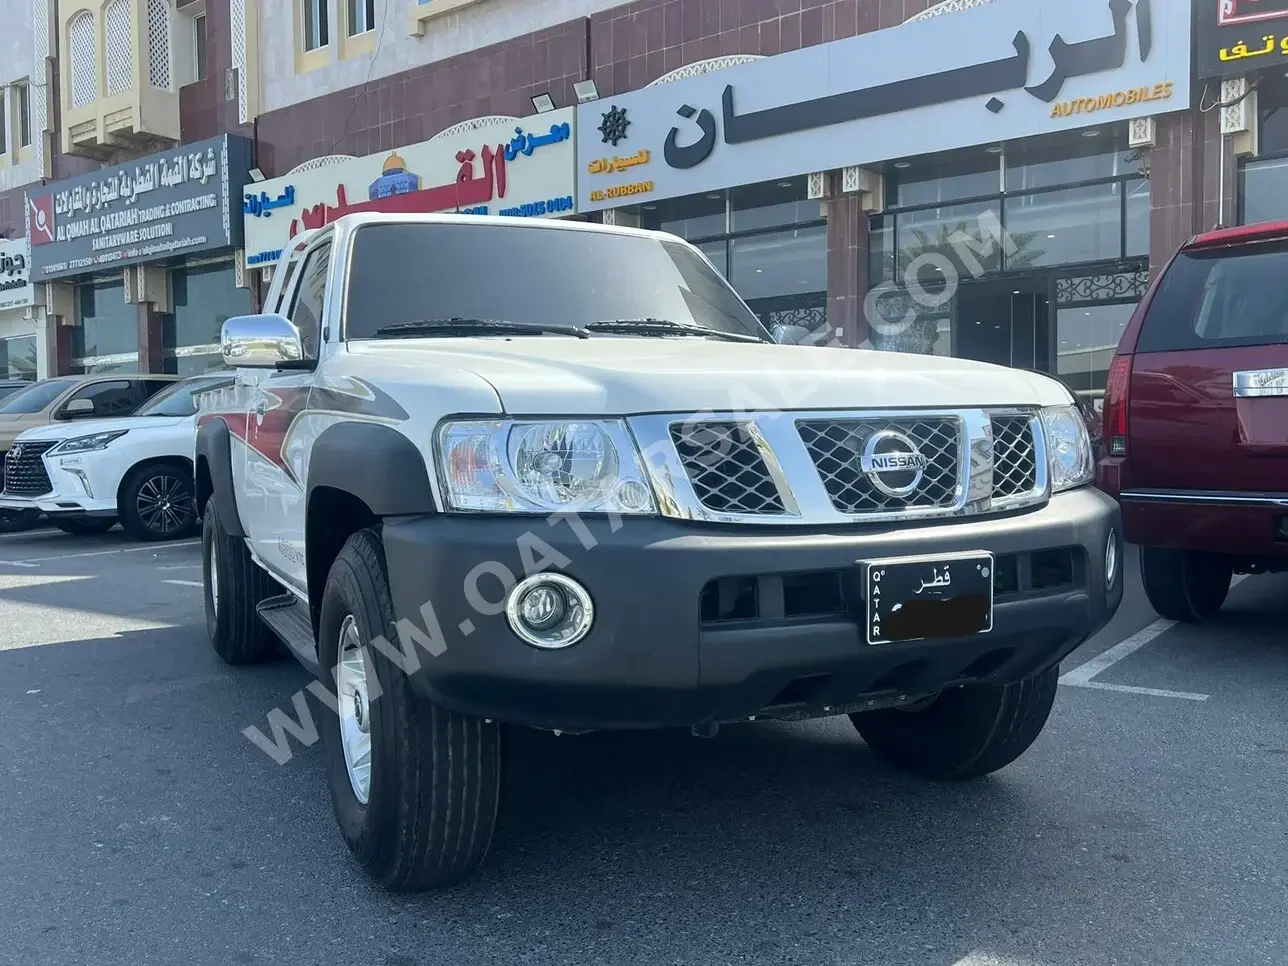 Nissan  Patrol  SGL  2014  Automatic  164,000 Km  6 Cylinder  Four Wheel Drive (4WD)  Pick Up  Silver